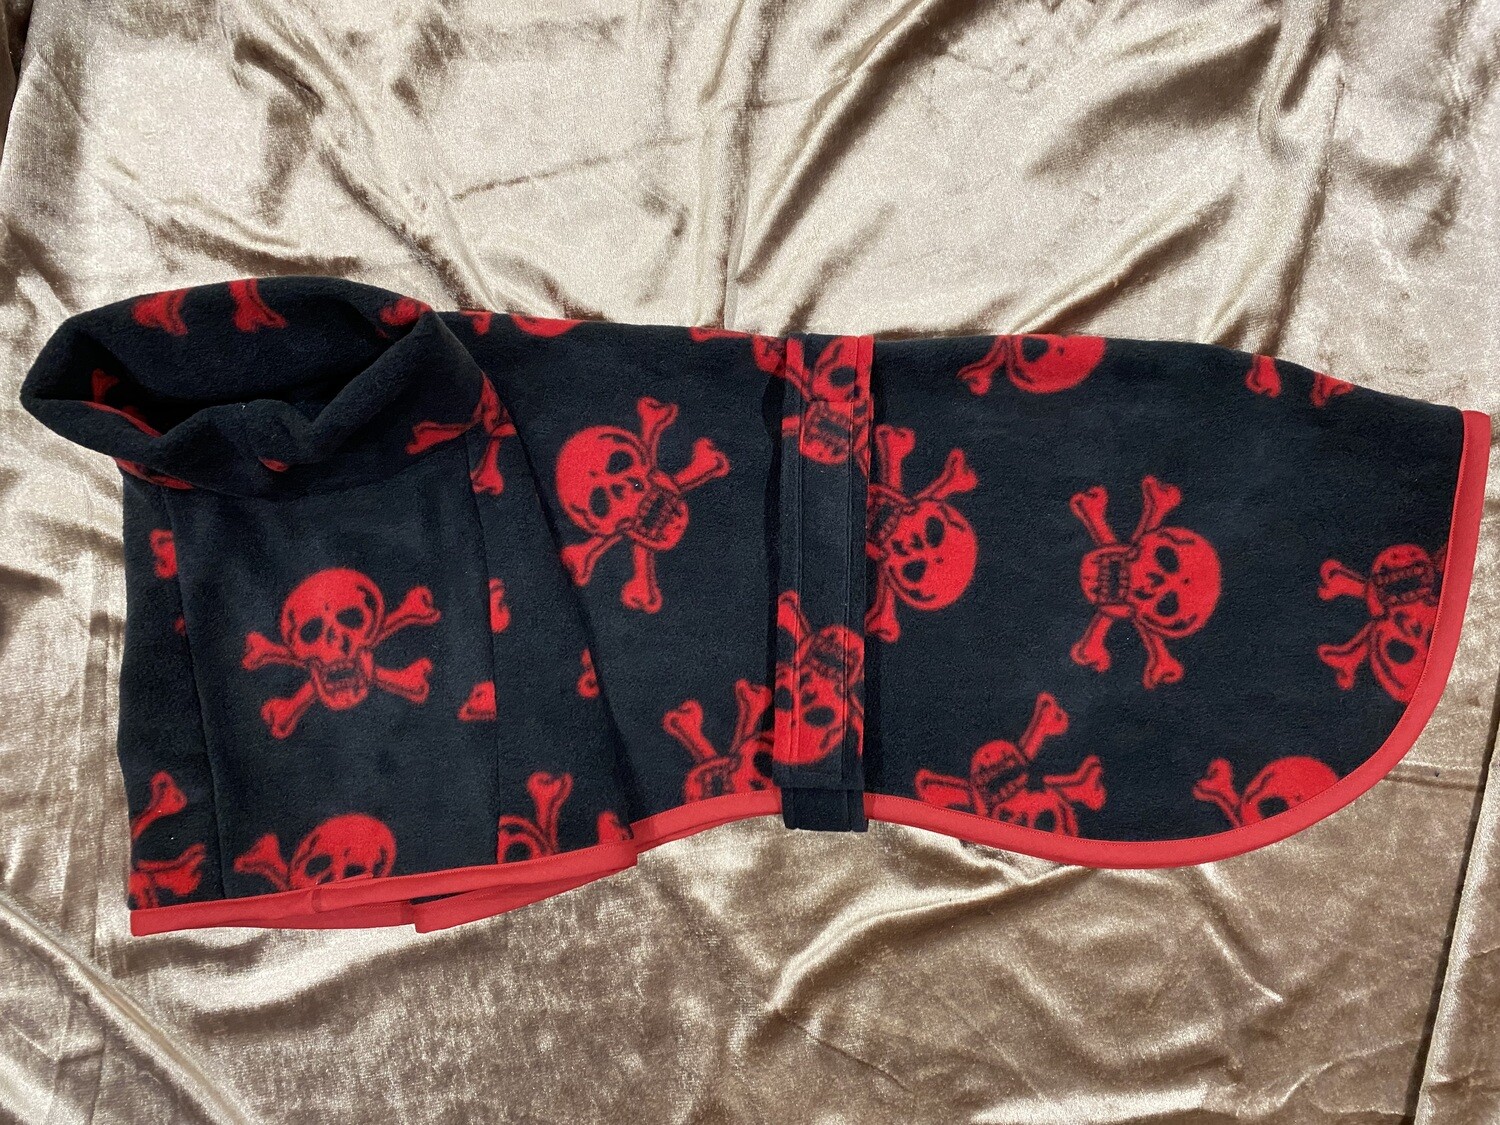 HANDMADE WITH LOVE - 28" Red Pirate Skull & Crossbones on Black Fleece with Red contrasting binding